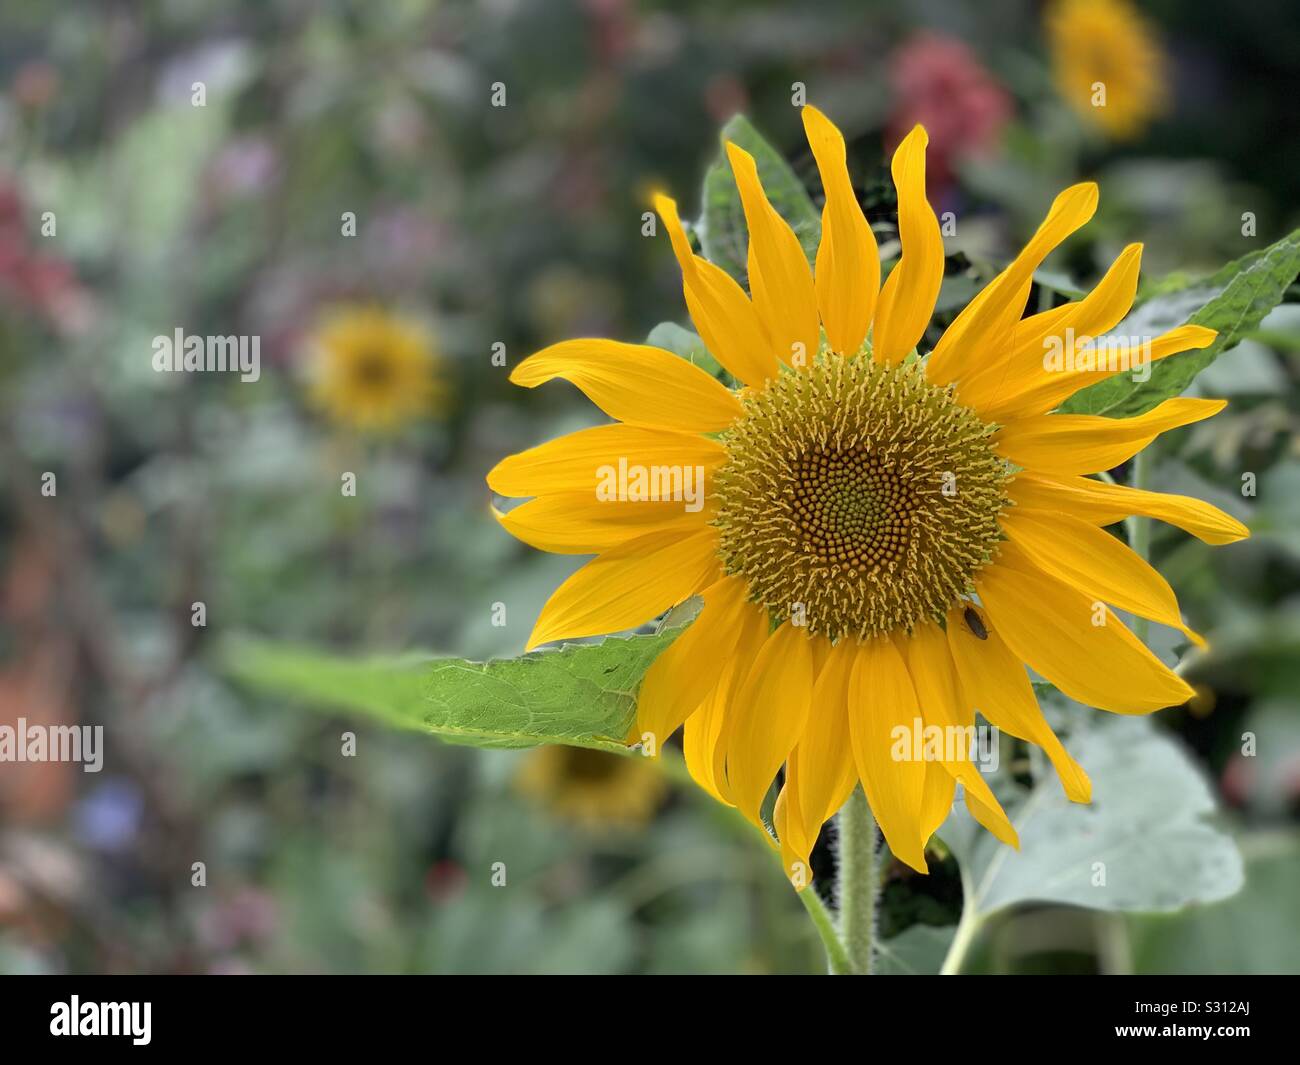 Sunflower bloom in the morning. Stock Photo